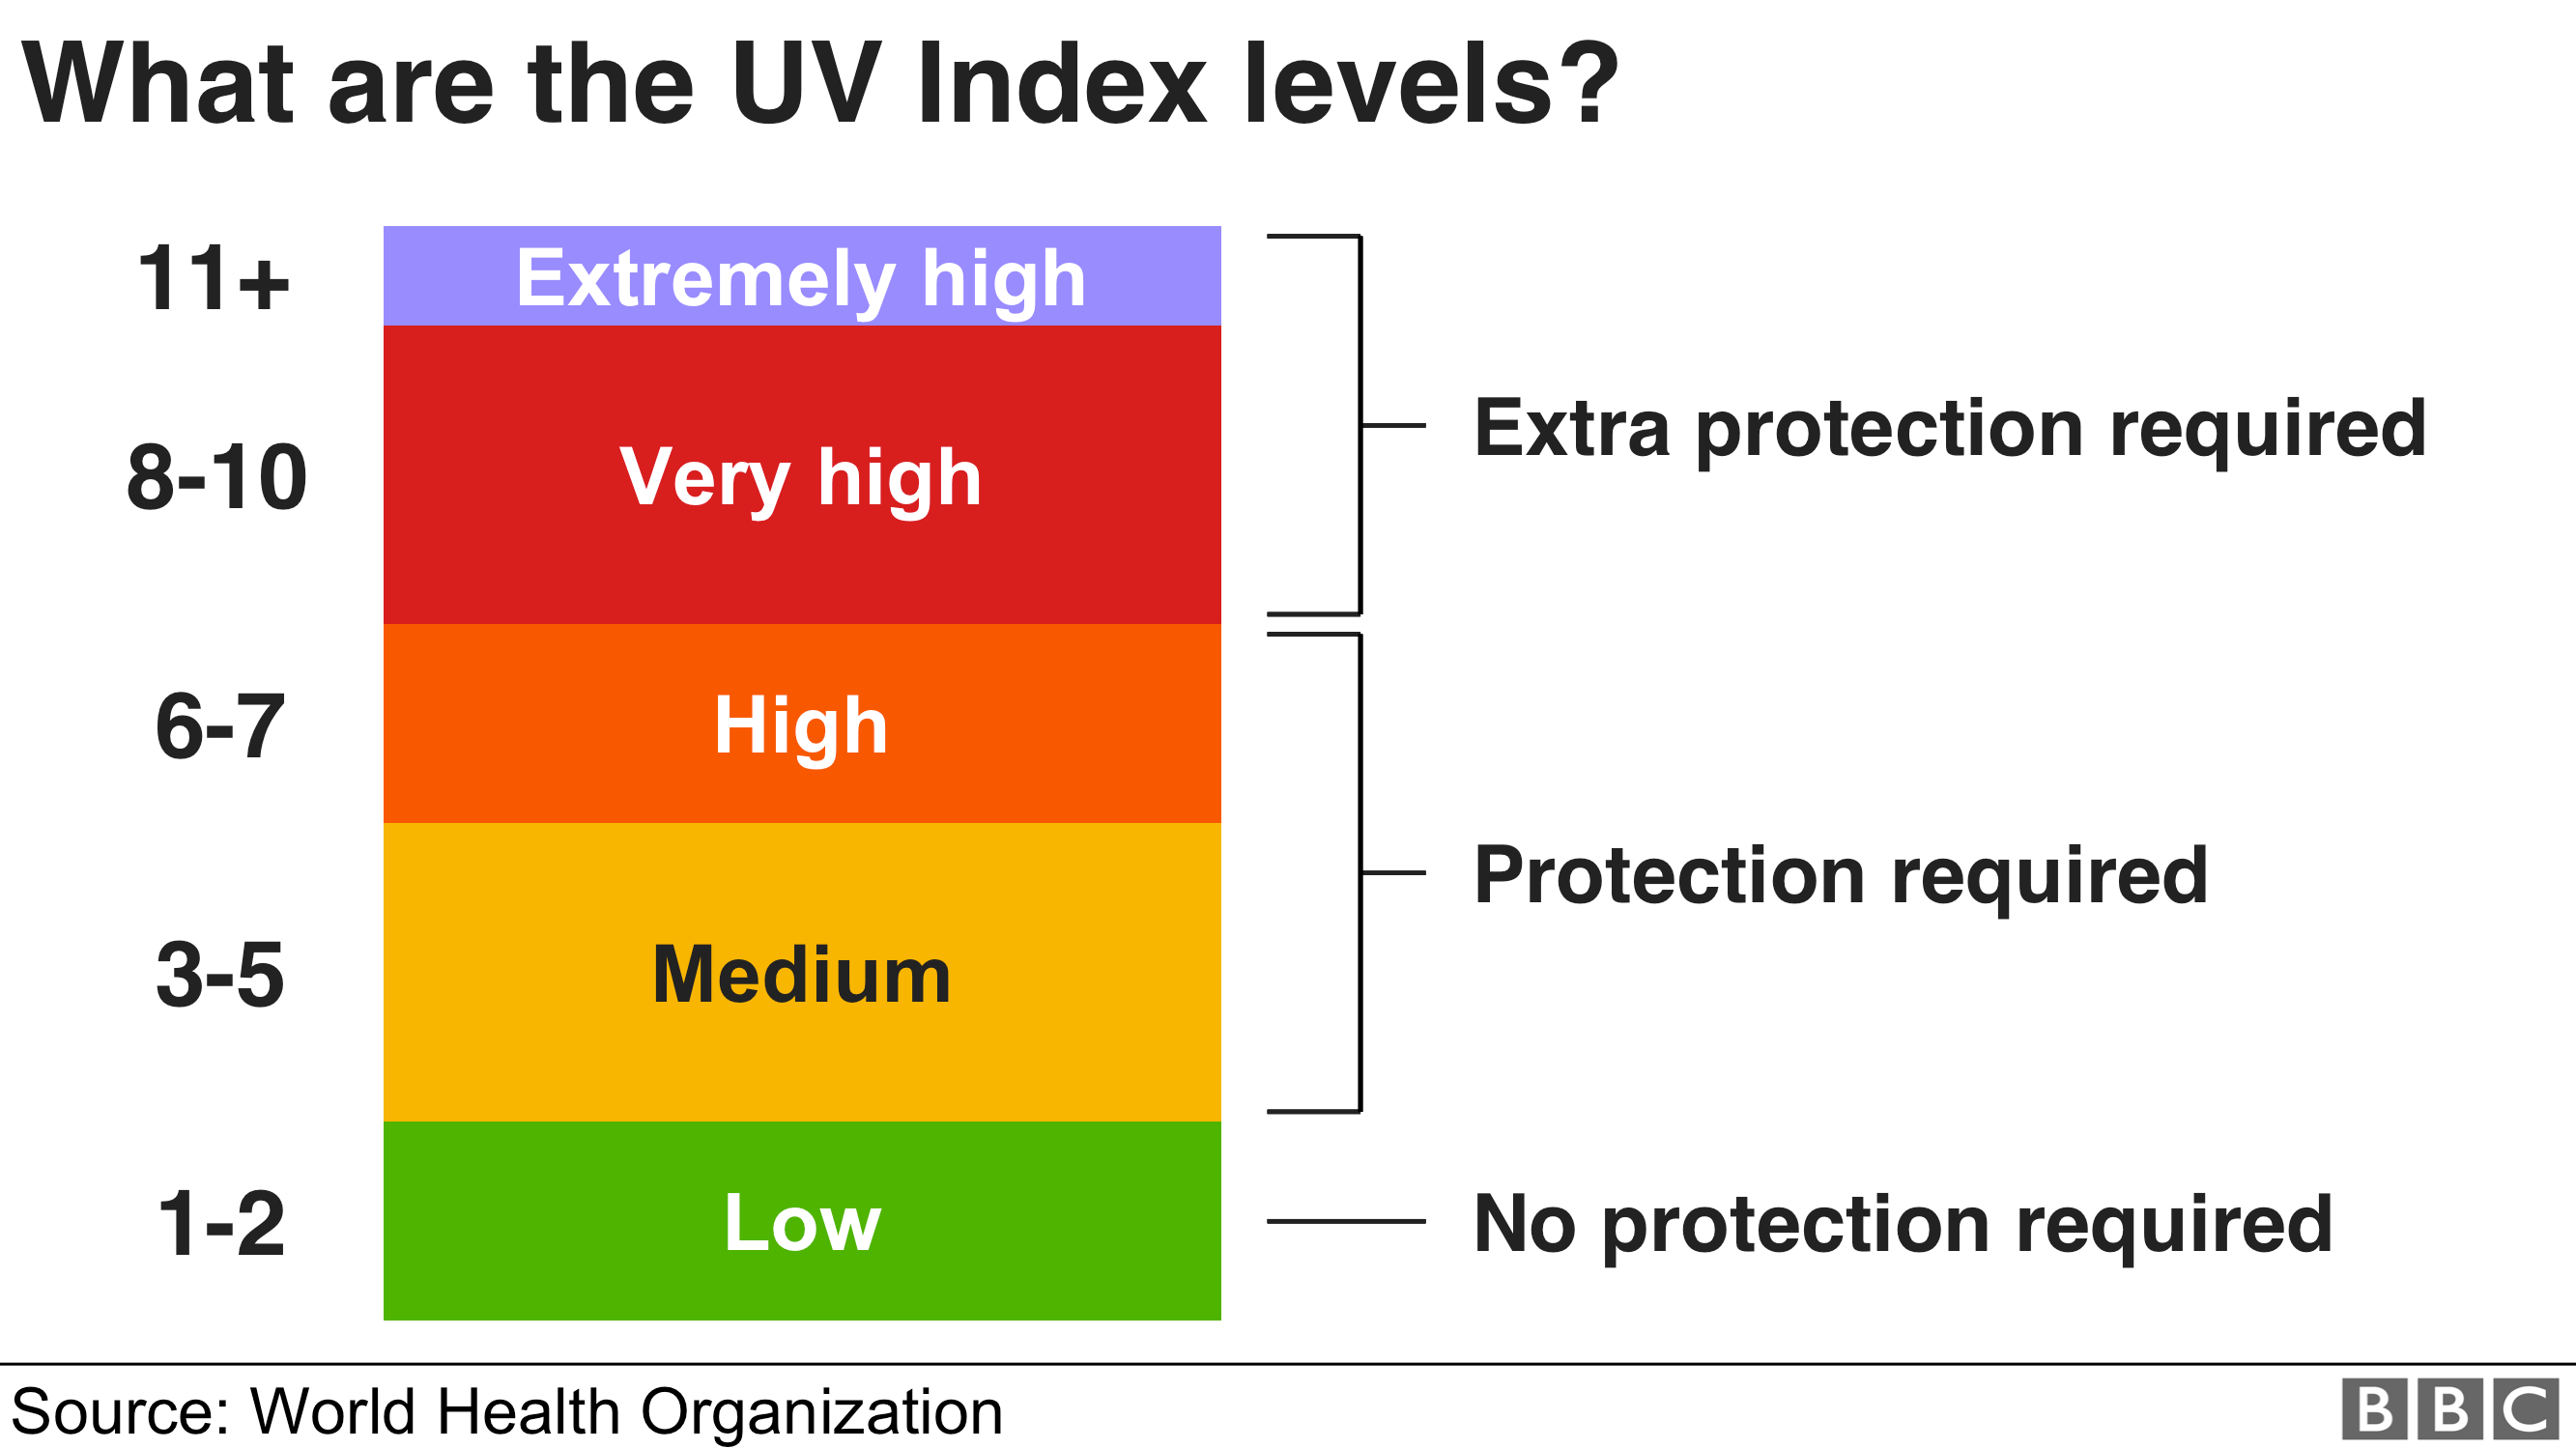 Graphic - UV Index levels: 1 to 2 = Low, 3 to 5 = Moderate, 6 to 7 = High, 8 to 10 = Very High, 10+ = Extremely High